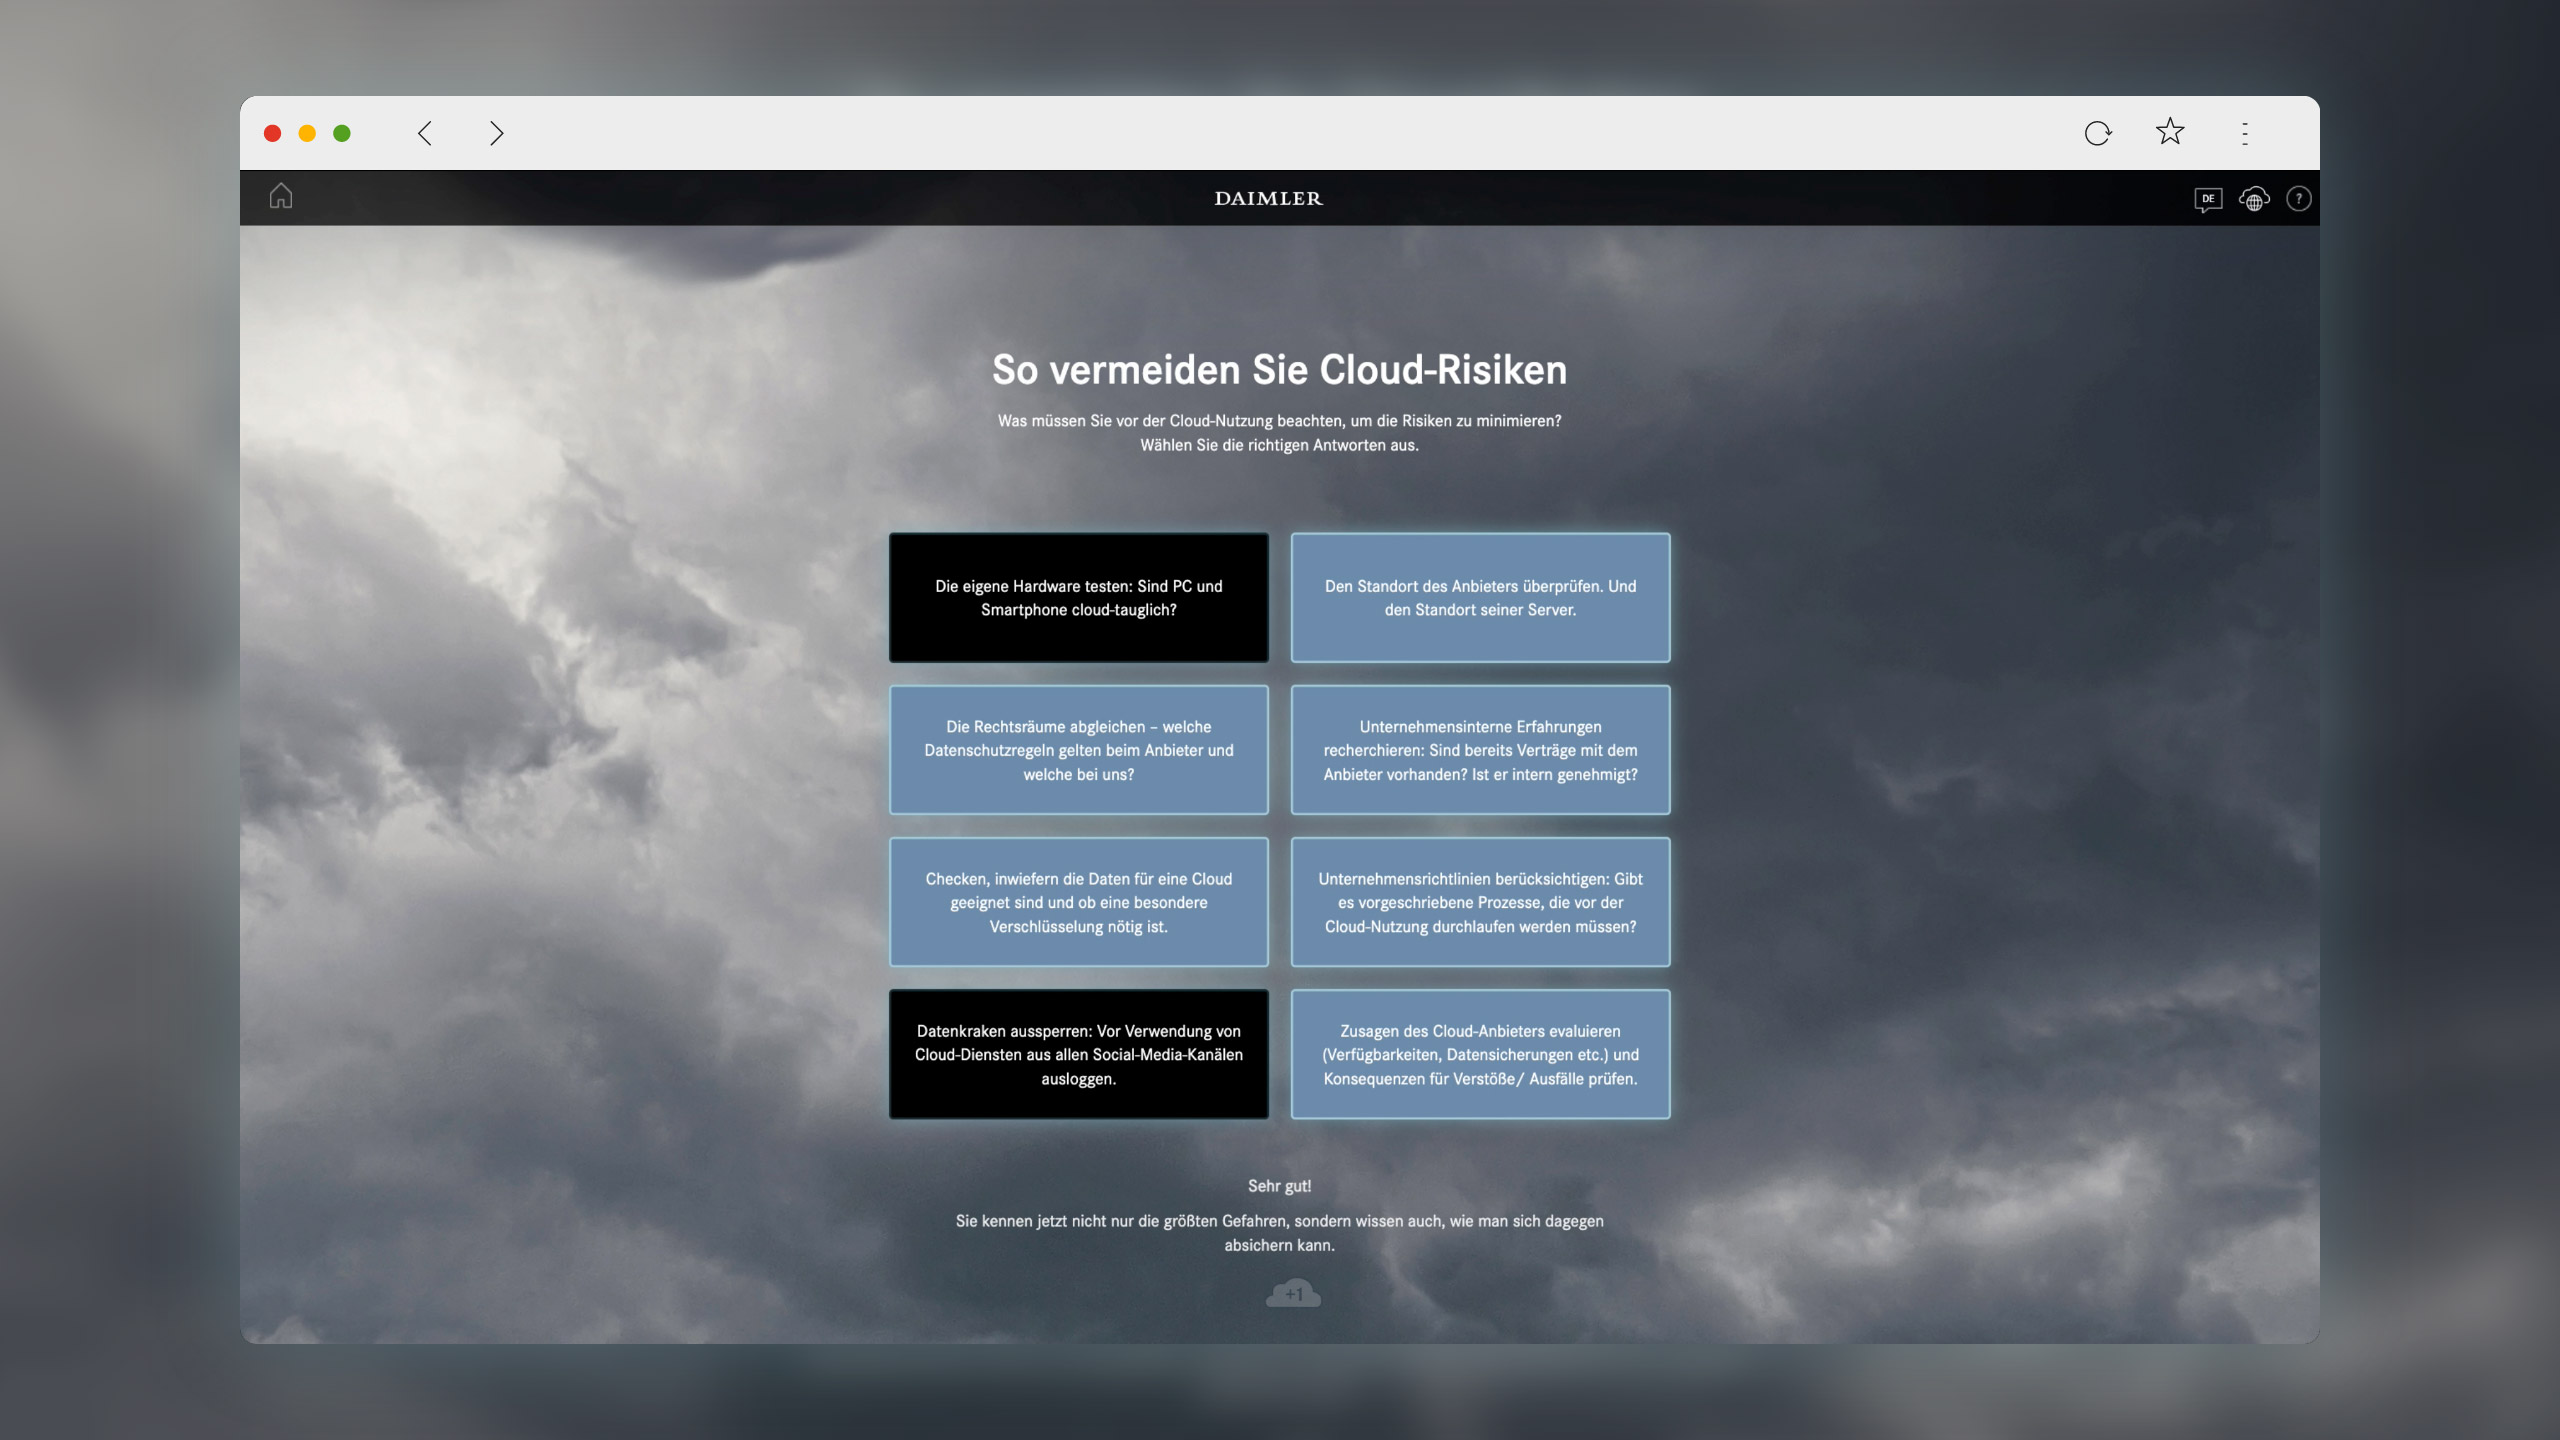 Gamification in Form eines Quiz im Cloud-Computing-E-Learning